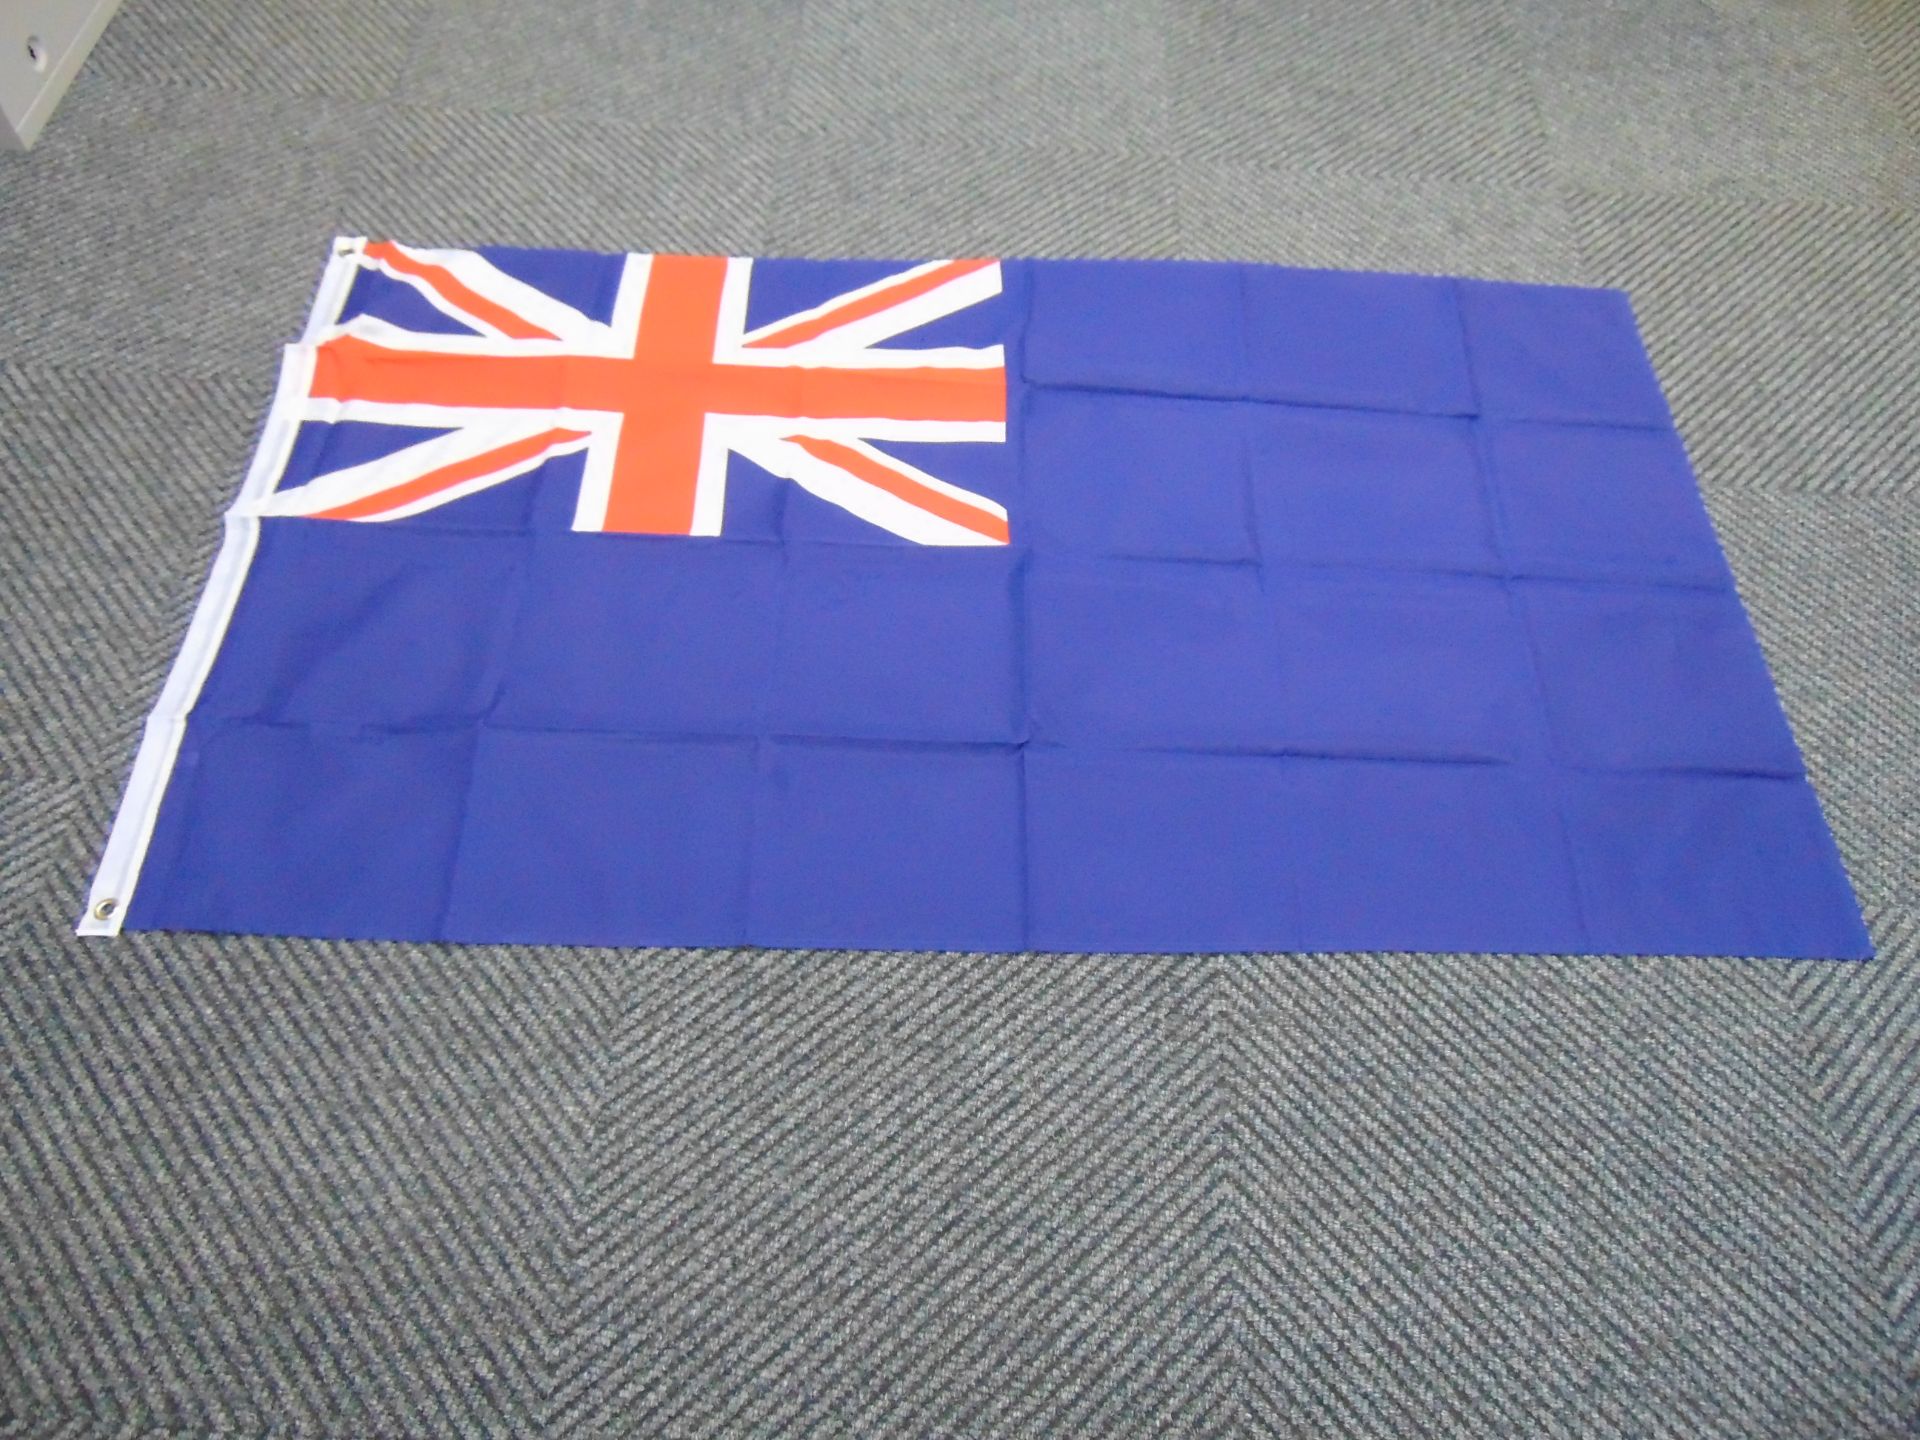 Blue Ensign Flag - 5ft x 3ft with Metal Eyelets. - Image 4 of 6